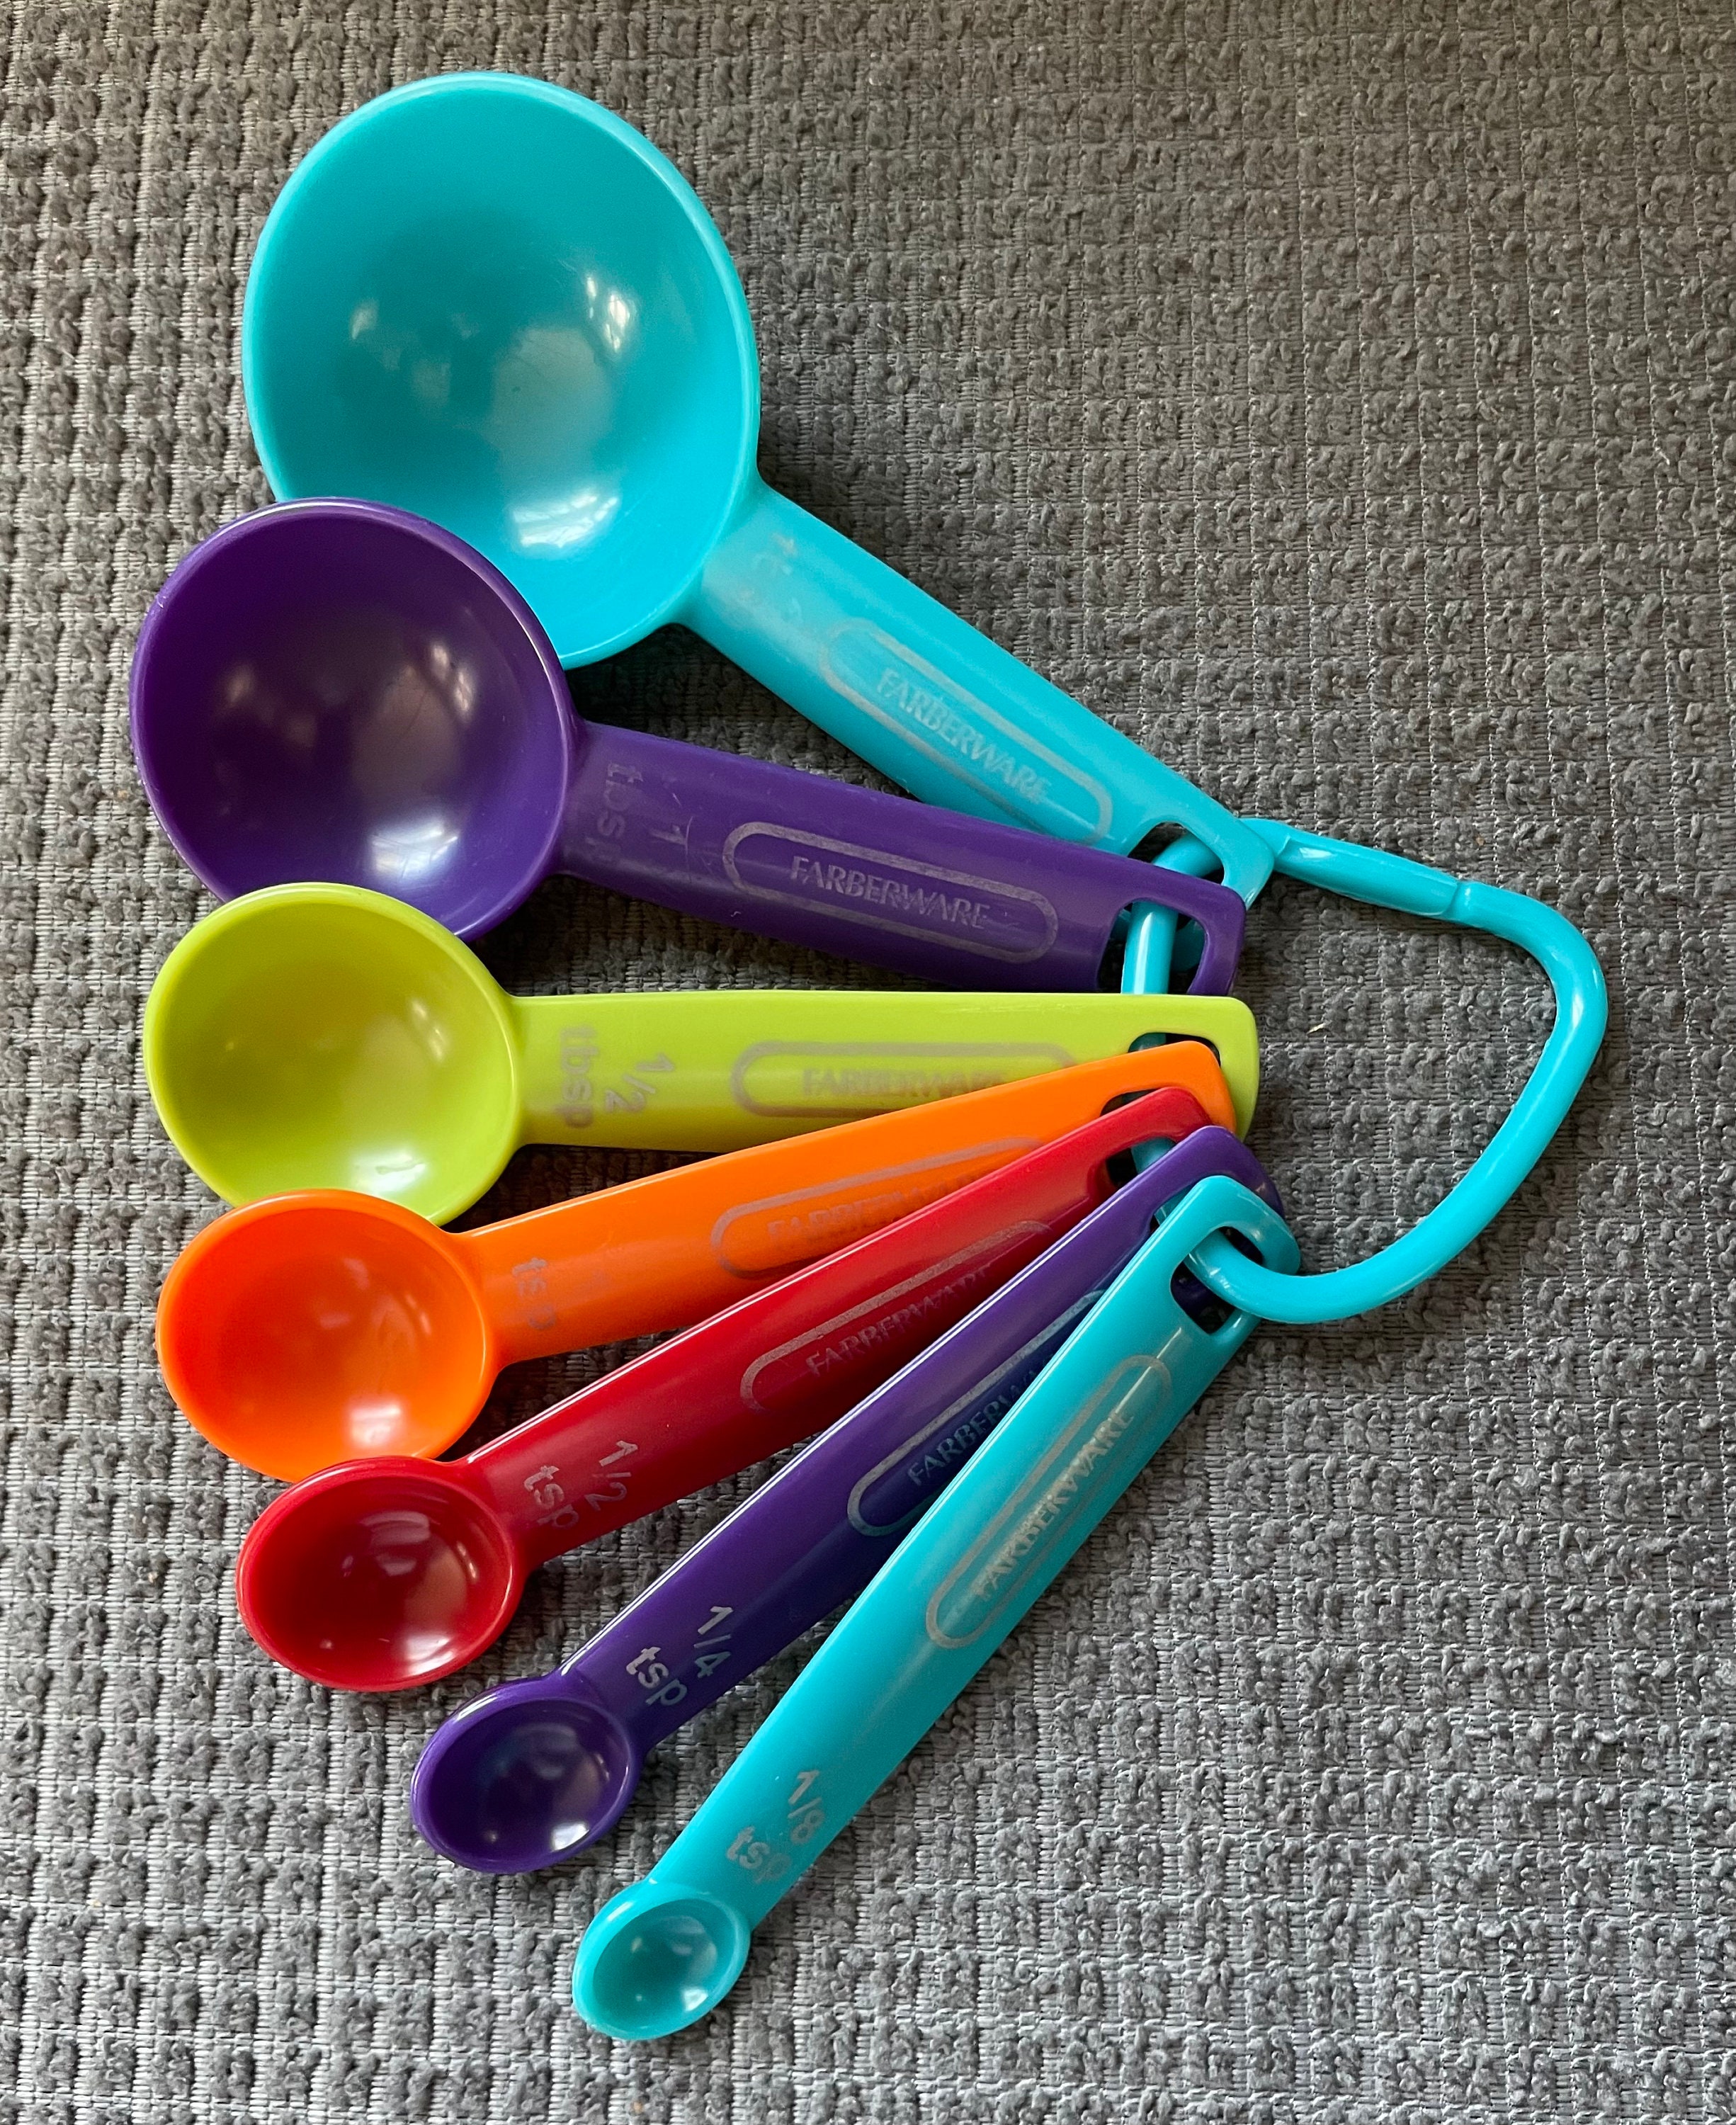 Farberware - Measuring Cup and Spoon 10-Piece Set